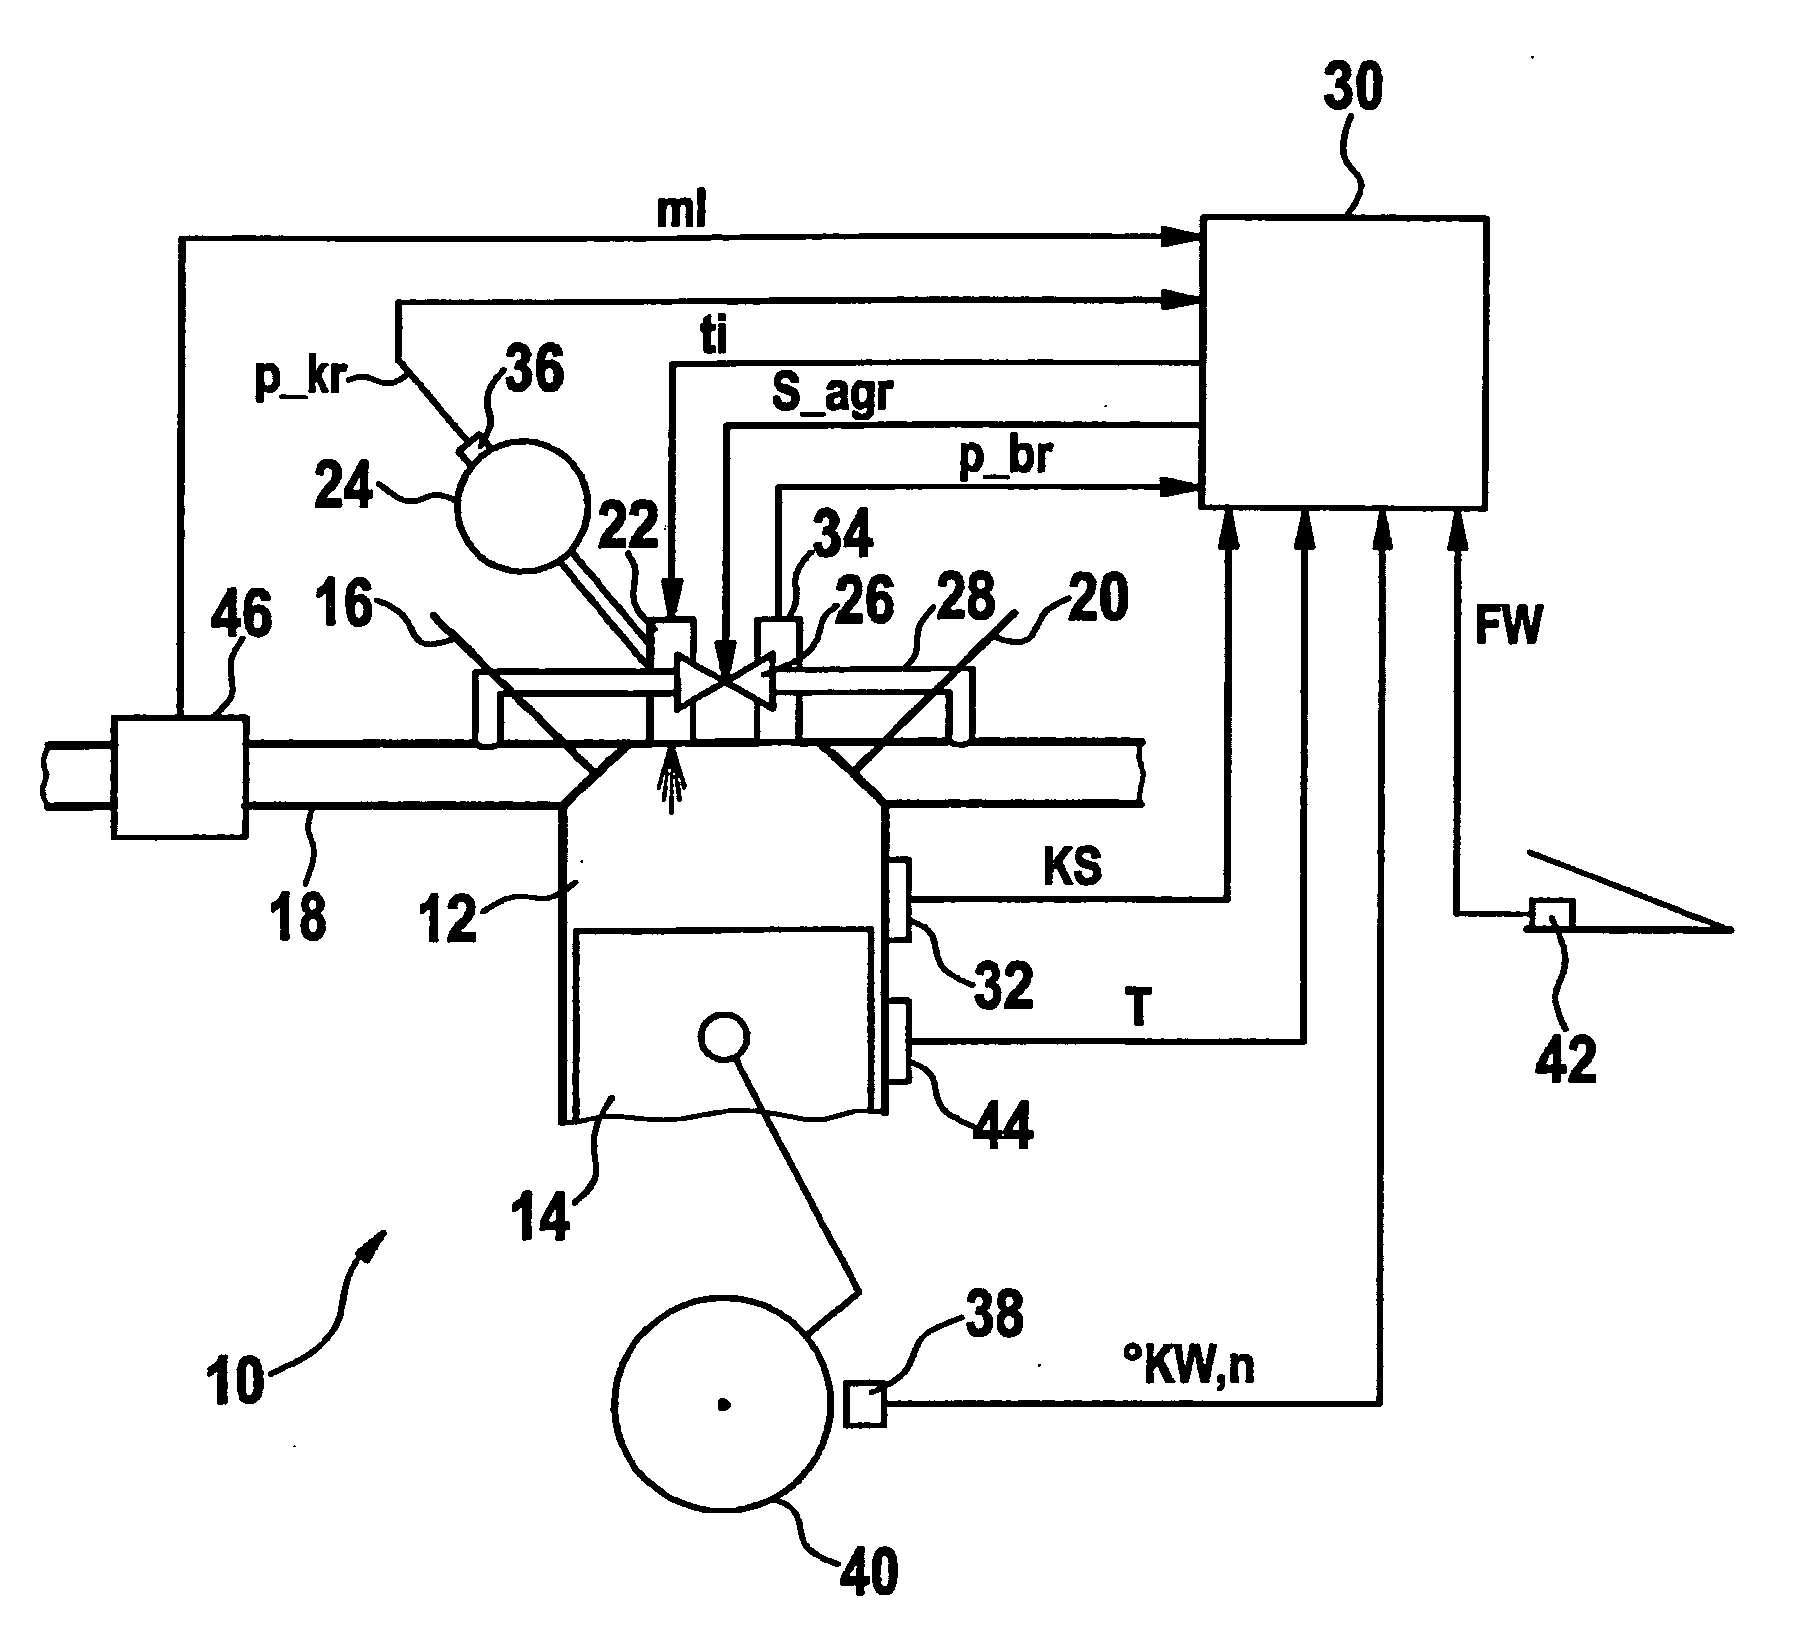 Method for controlling a fuel injector of a diesel engine